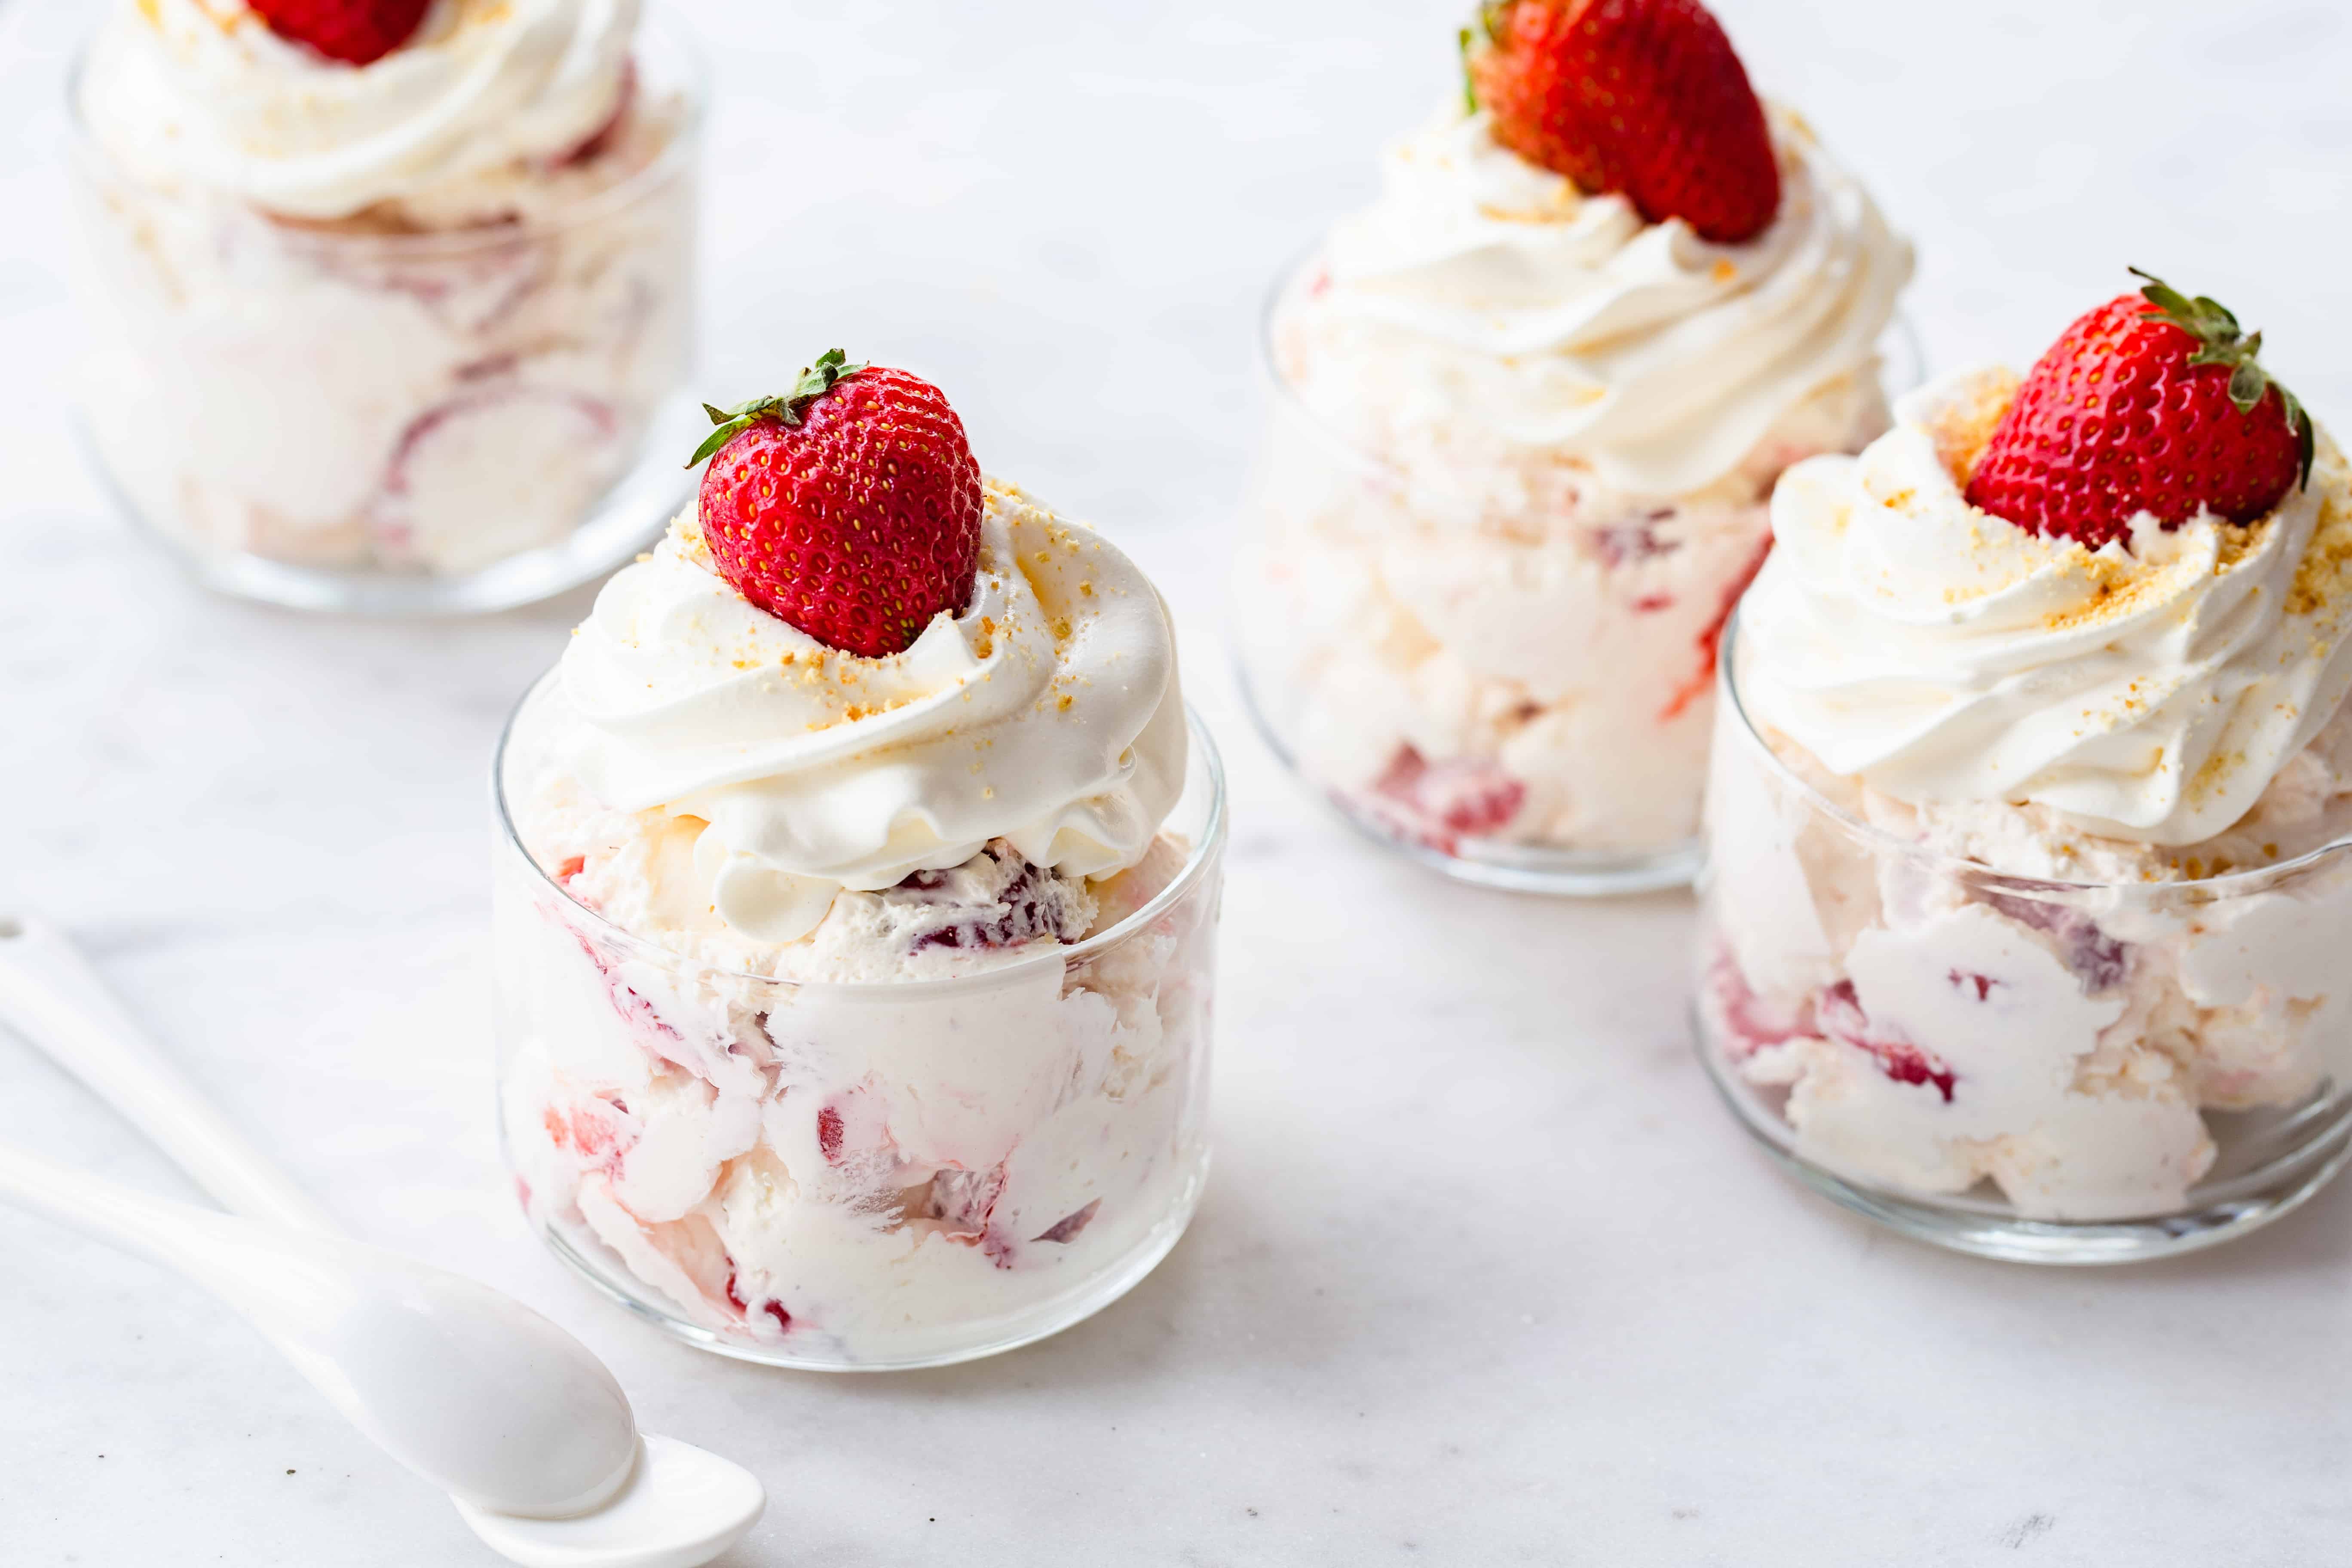 Strawberry Cheesecake Fluff comes together in a snap and is perfect for any occasion.